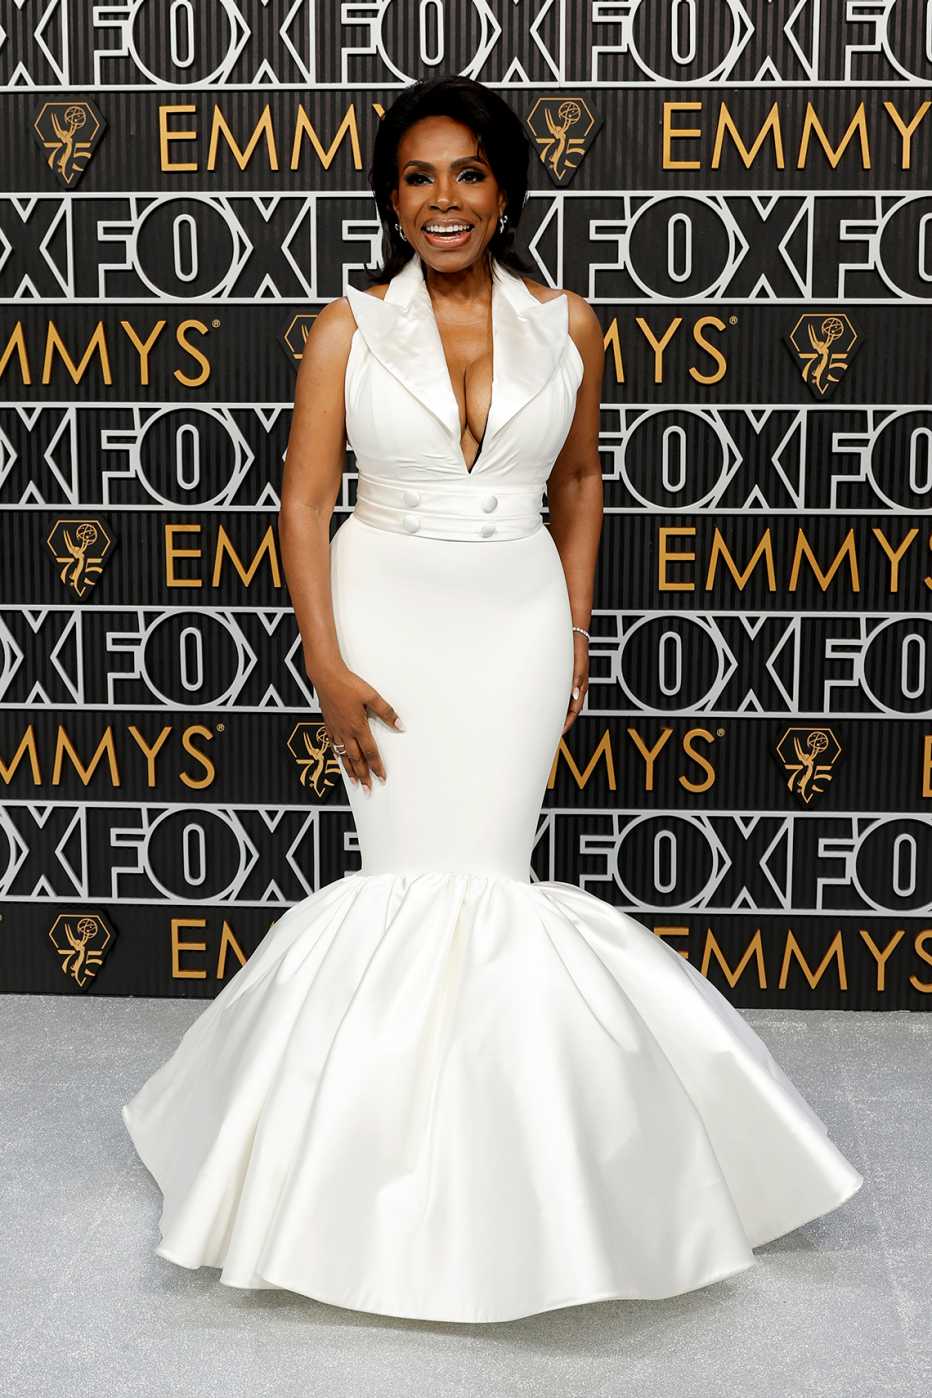 Sheryl Lee Ralph on the red carpet at the 75th Emmy Awards